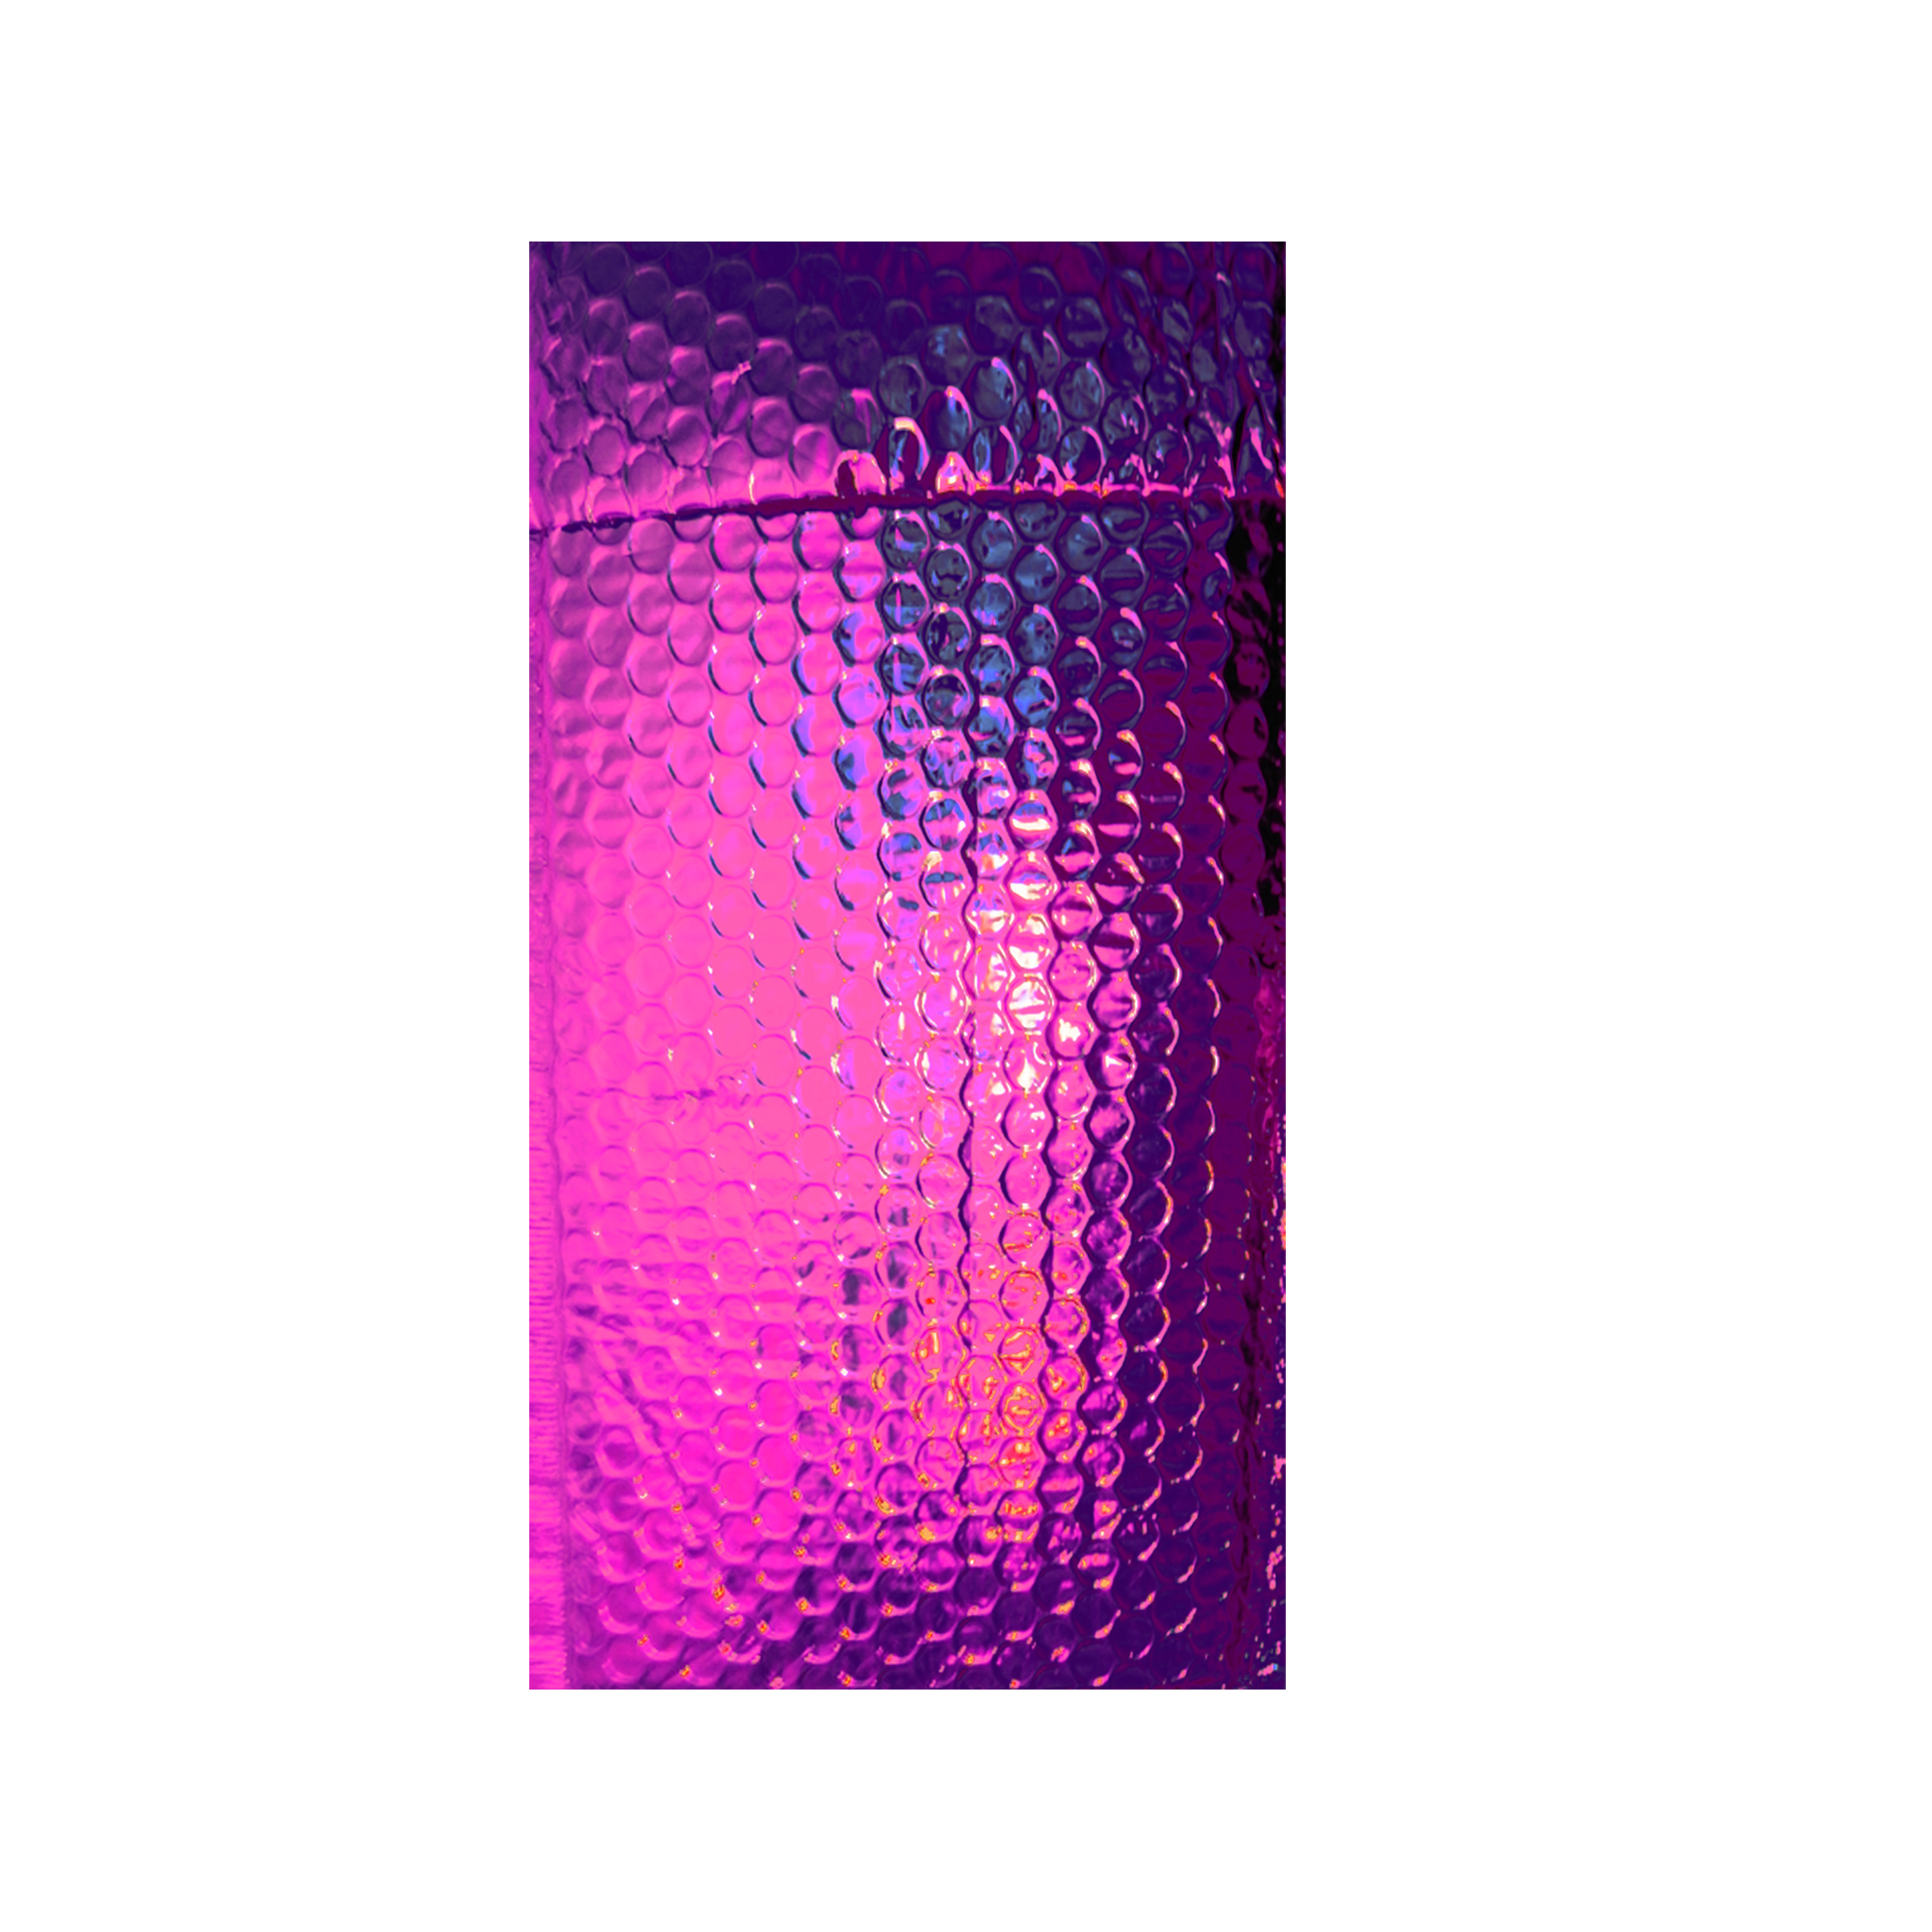 Pink and Purple psychedelic patterns on plastic